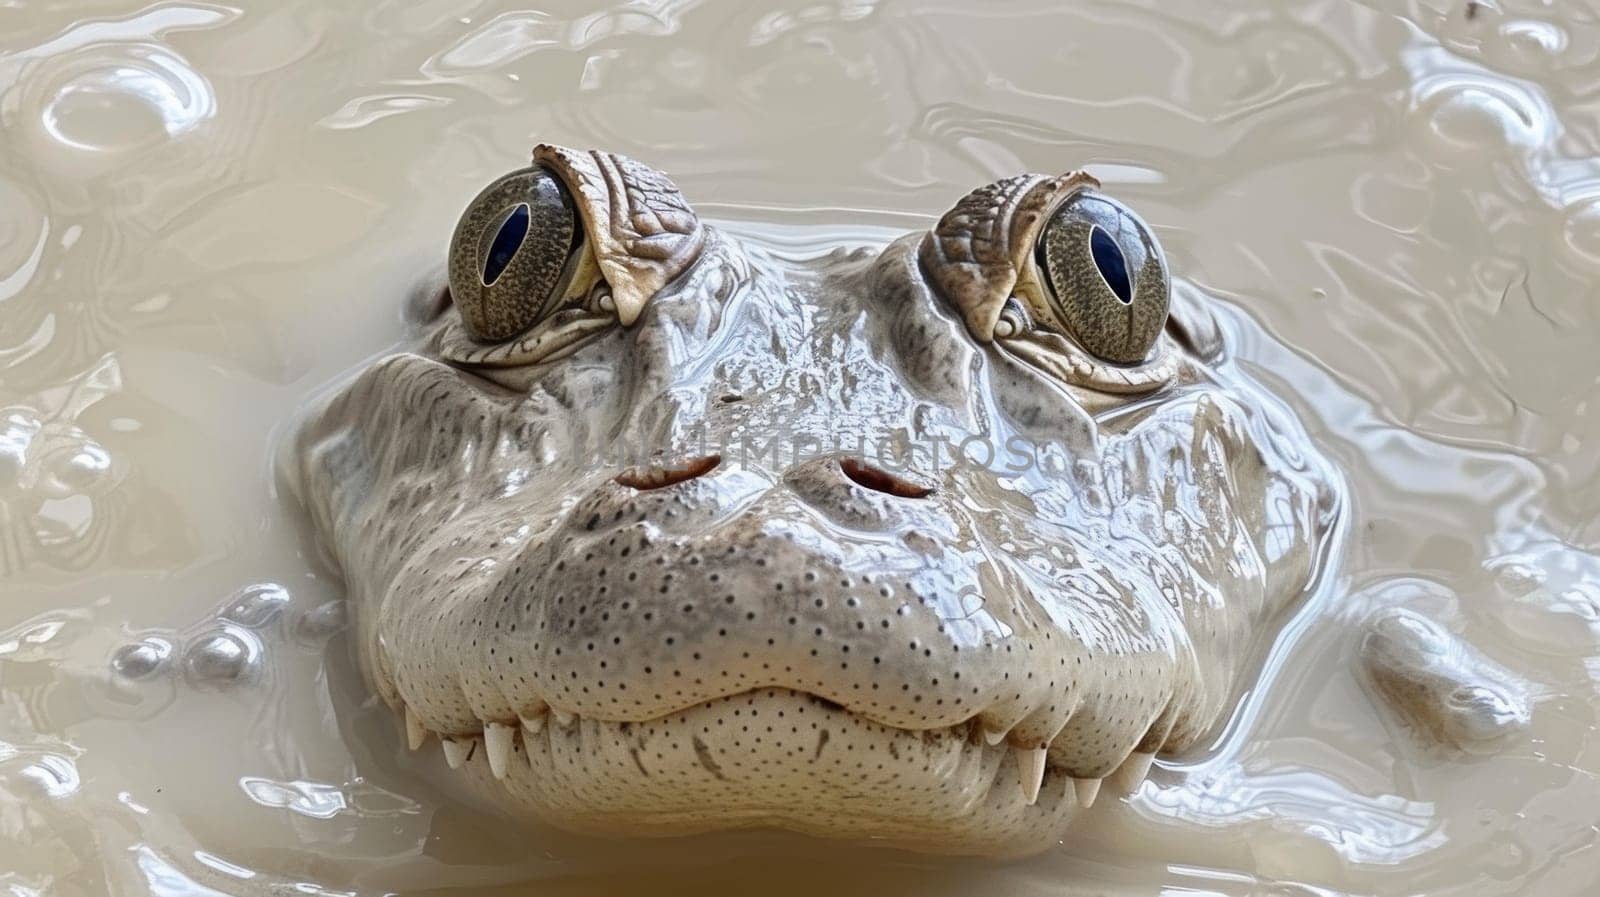 A close up of an alligator's face in a pool